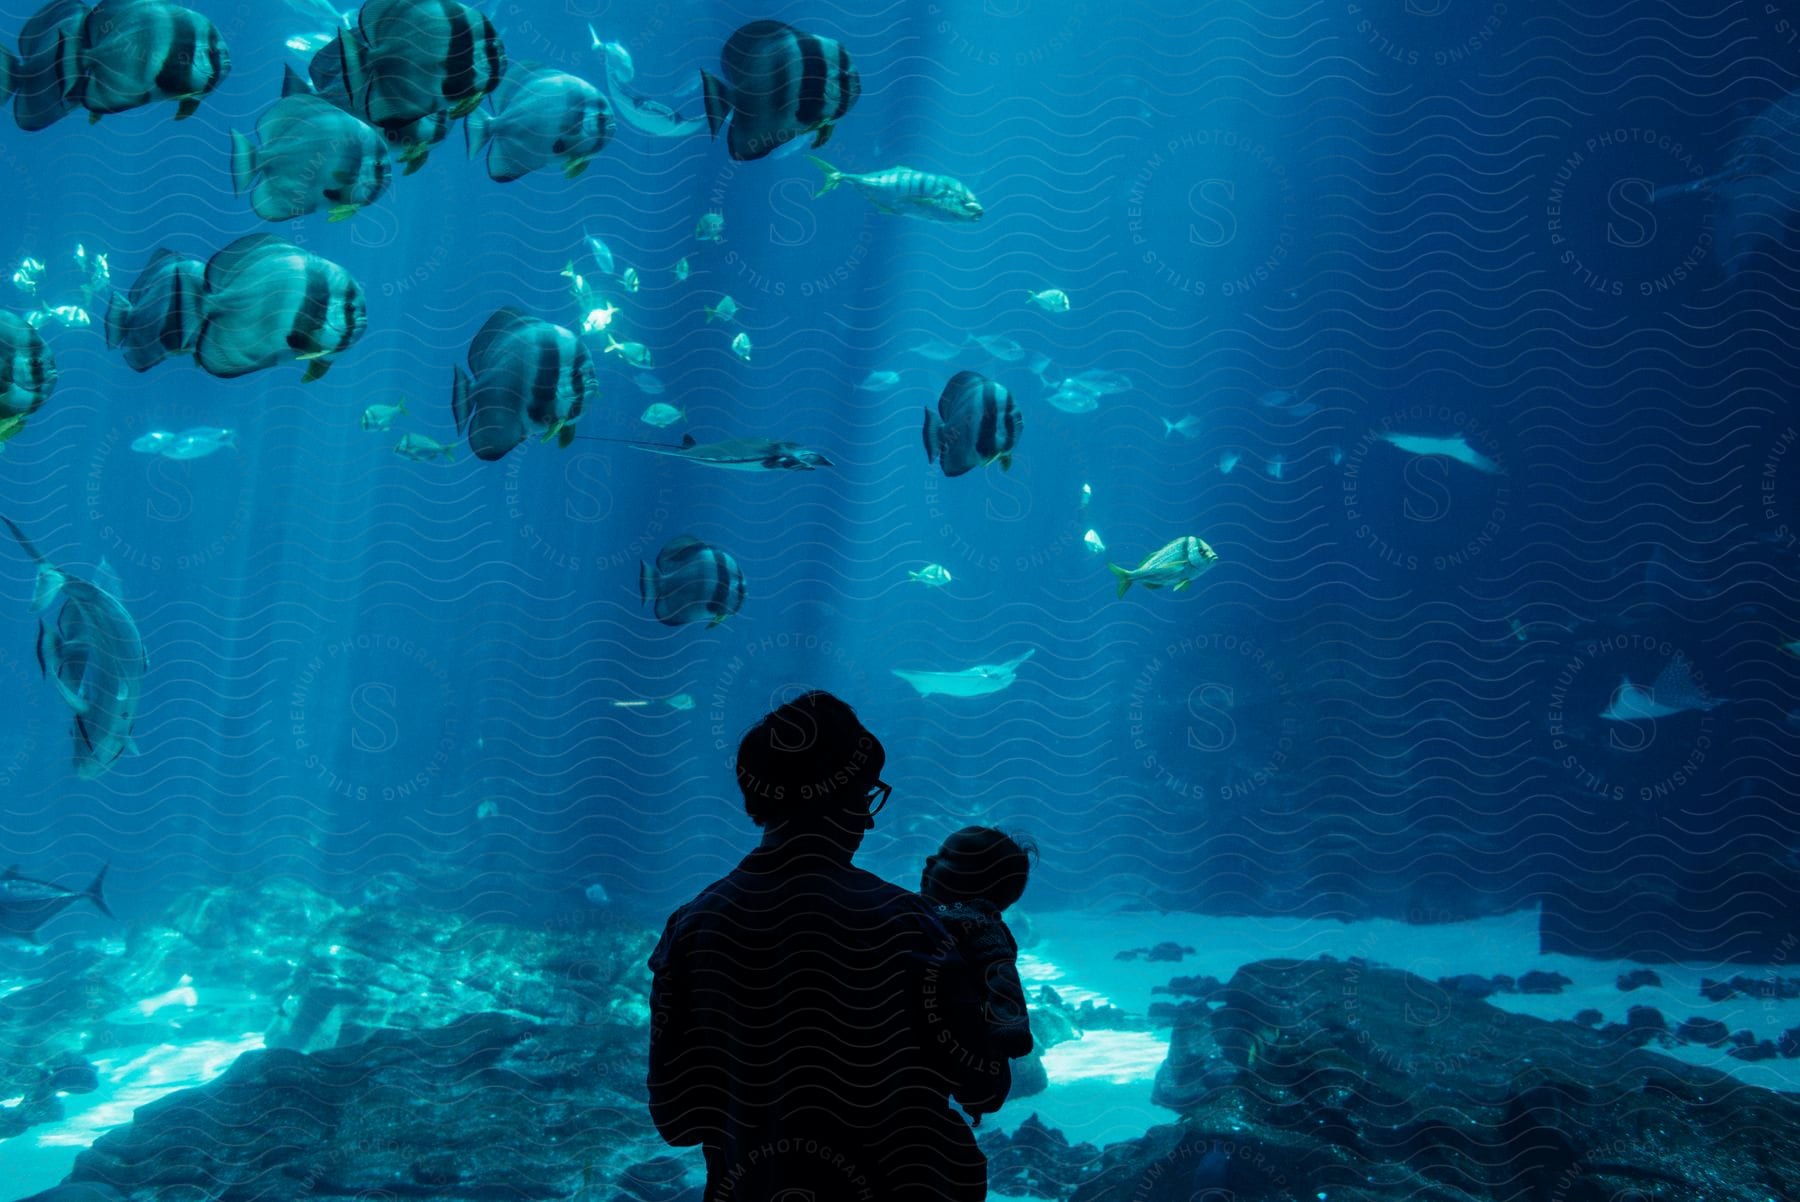 person holding baby stands in silhouette in front of aquarium wall with fish